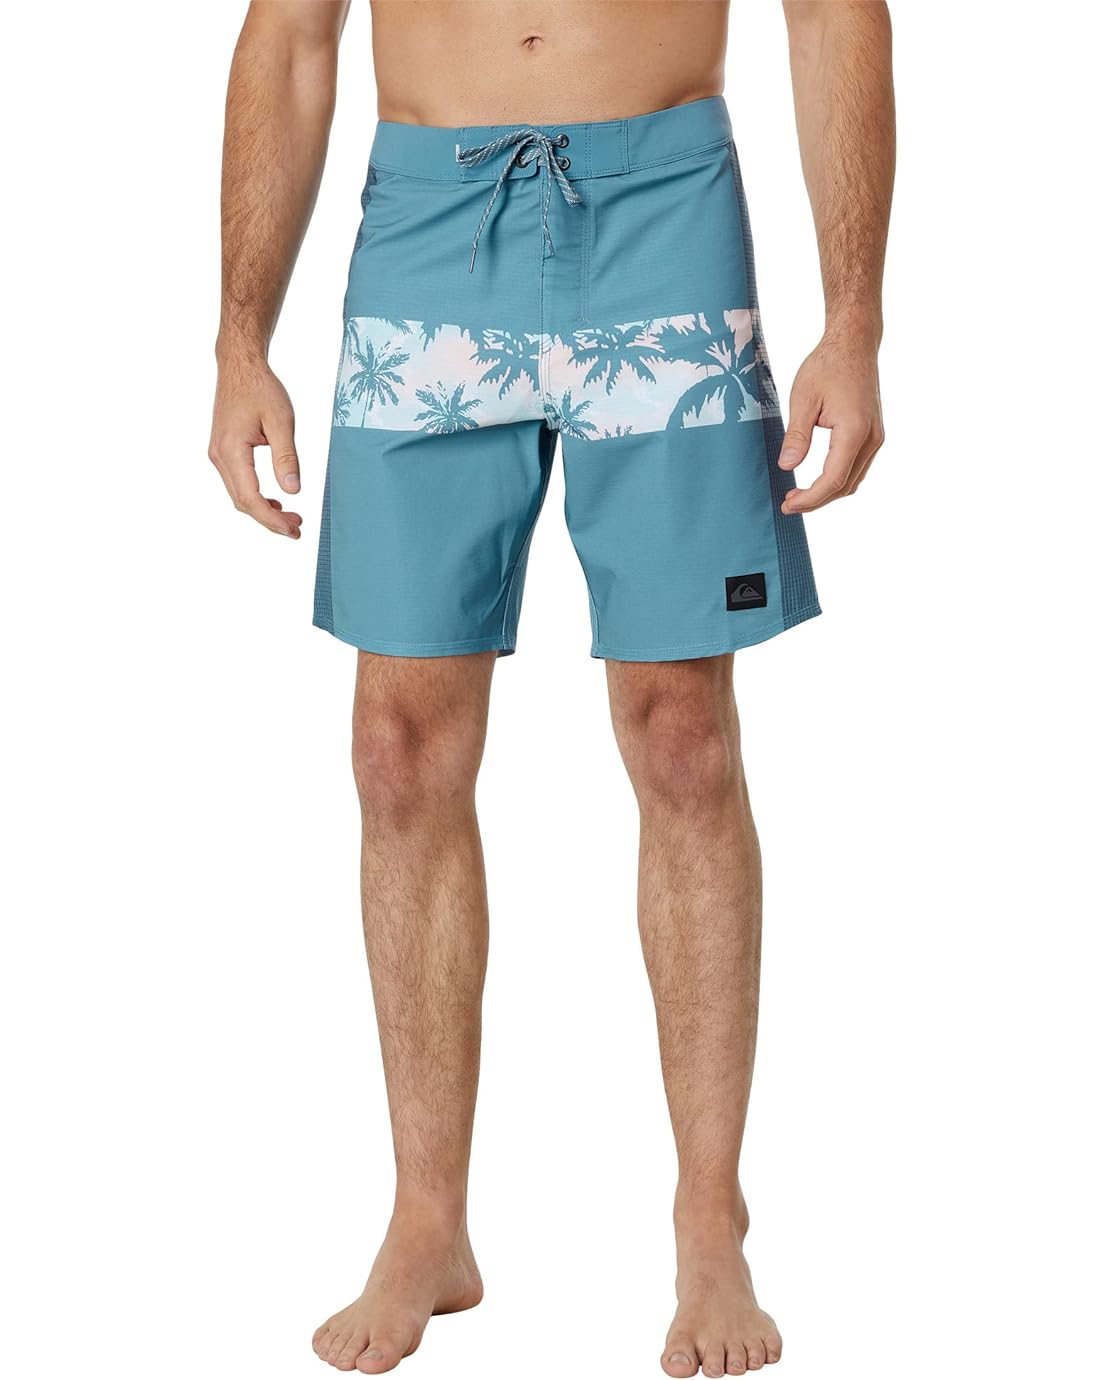 Quiksilver Highlite Arch 19 Boardshorts